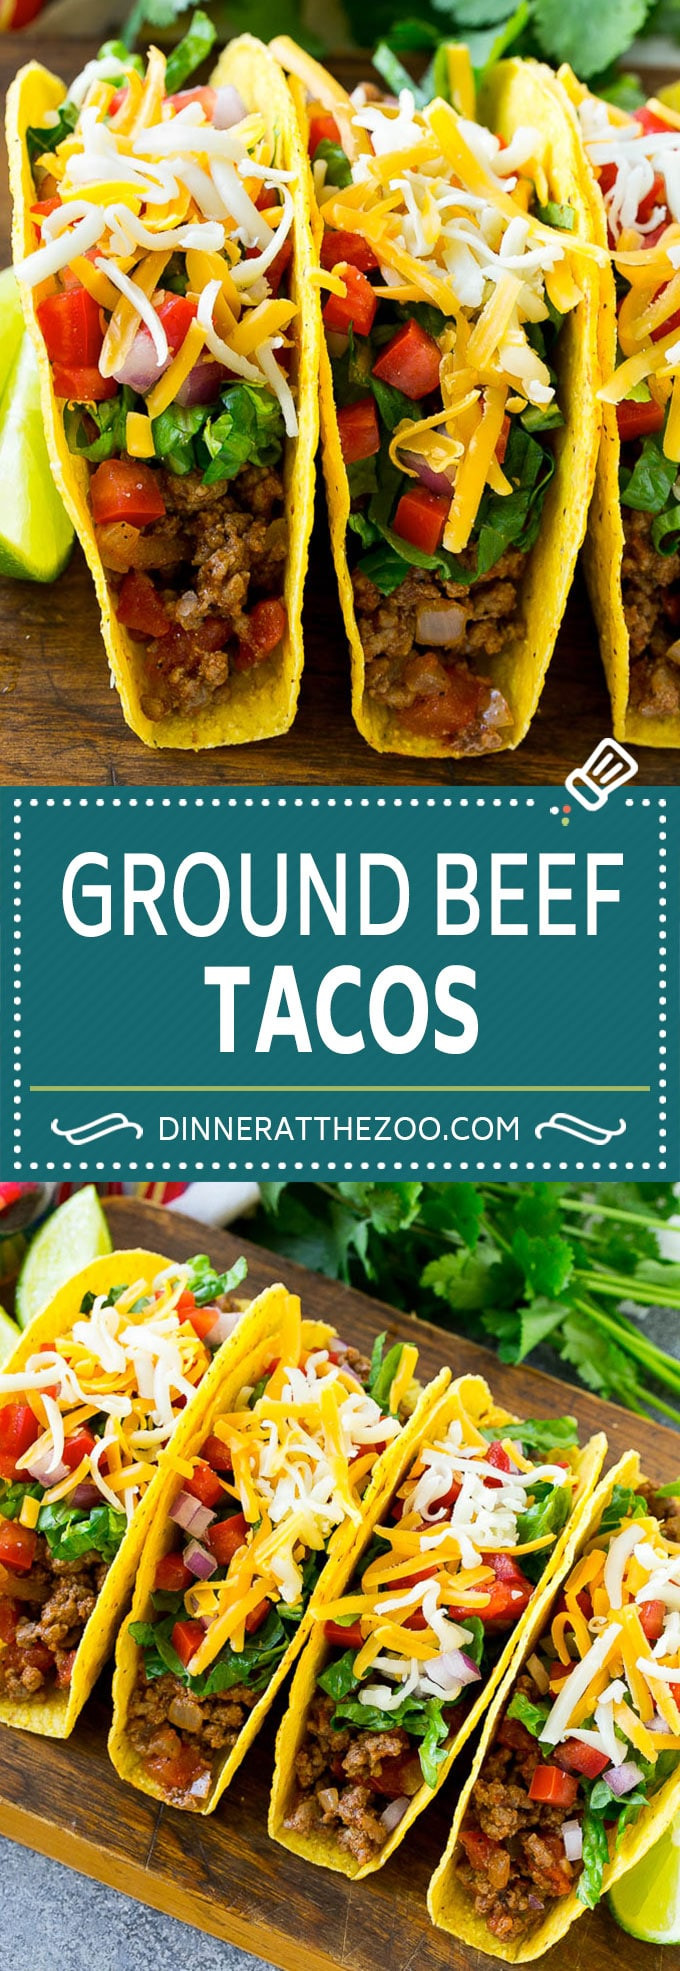 Ground Beef Tacos
 Ground Beef Tacos Dinner at the Zoo